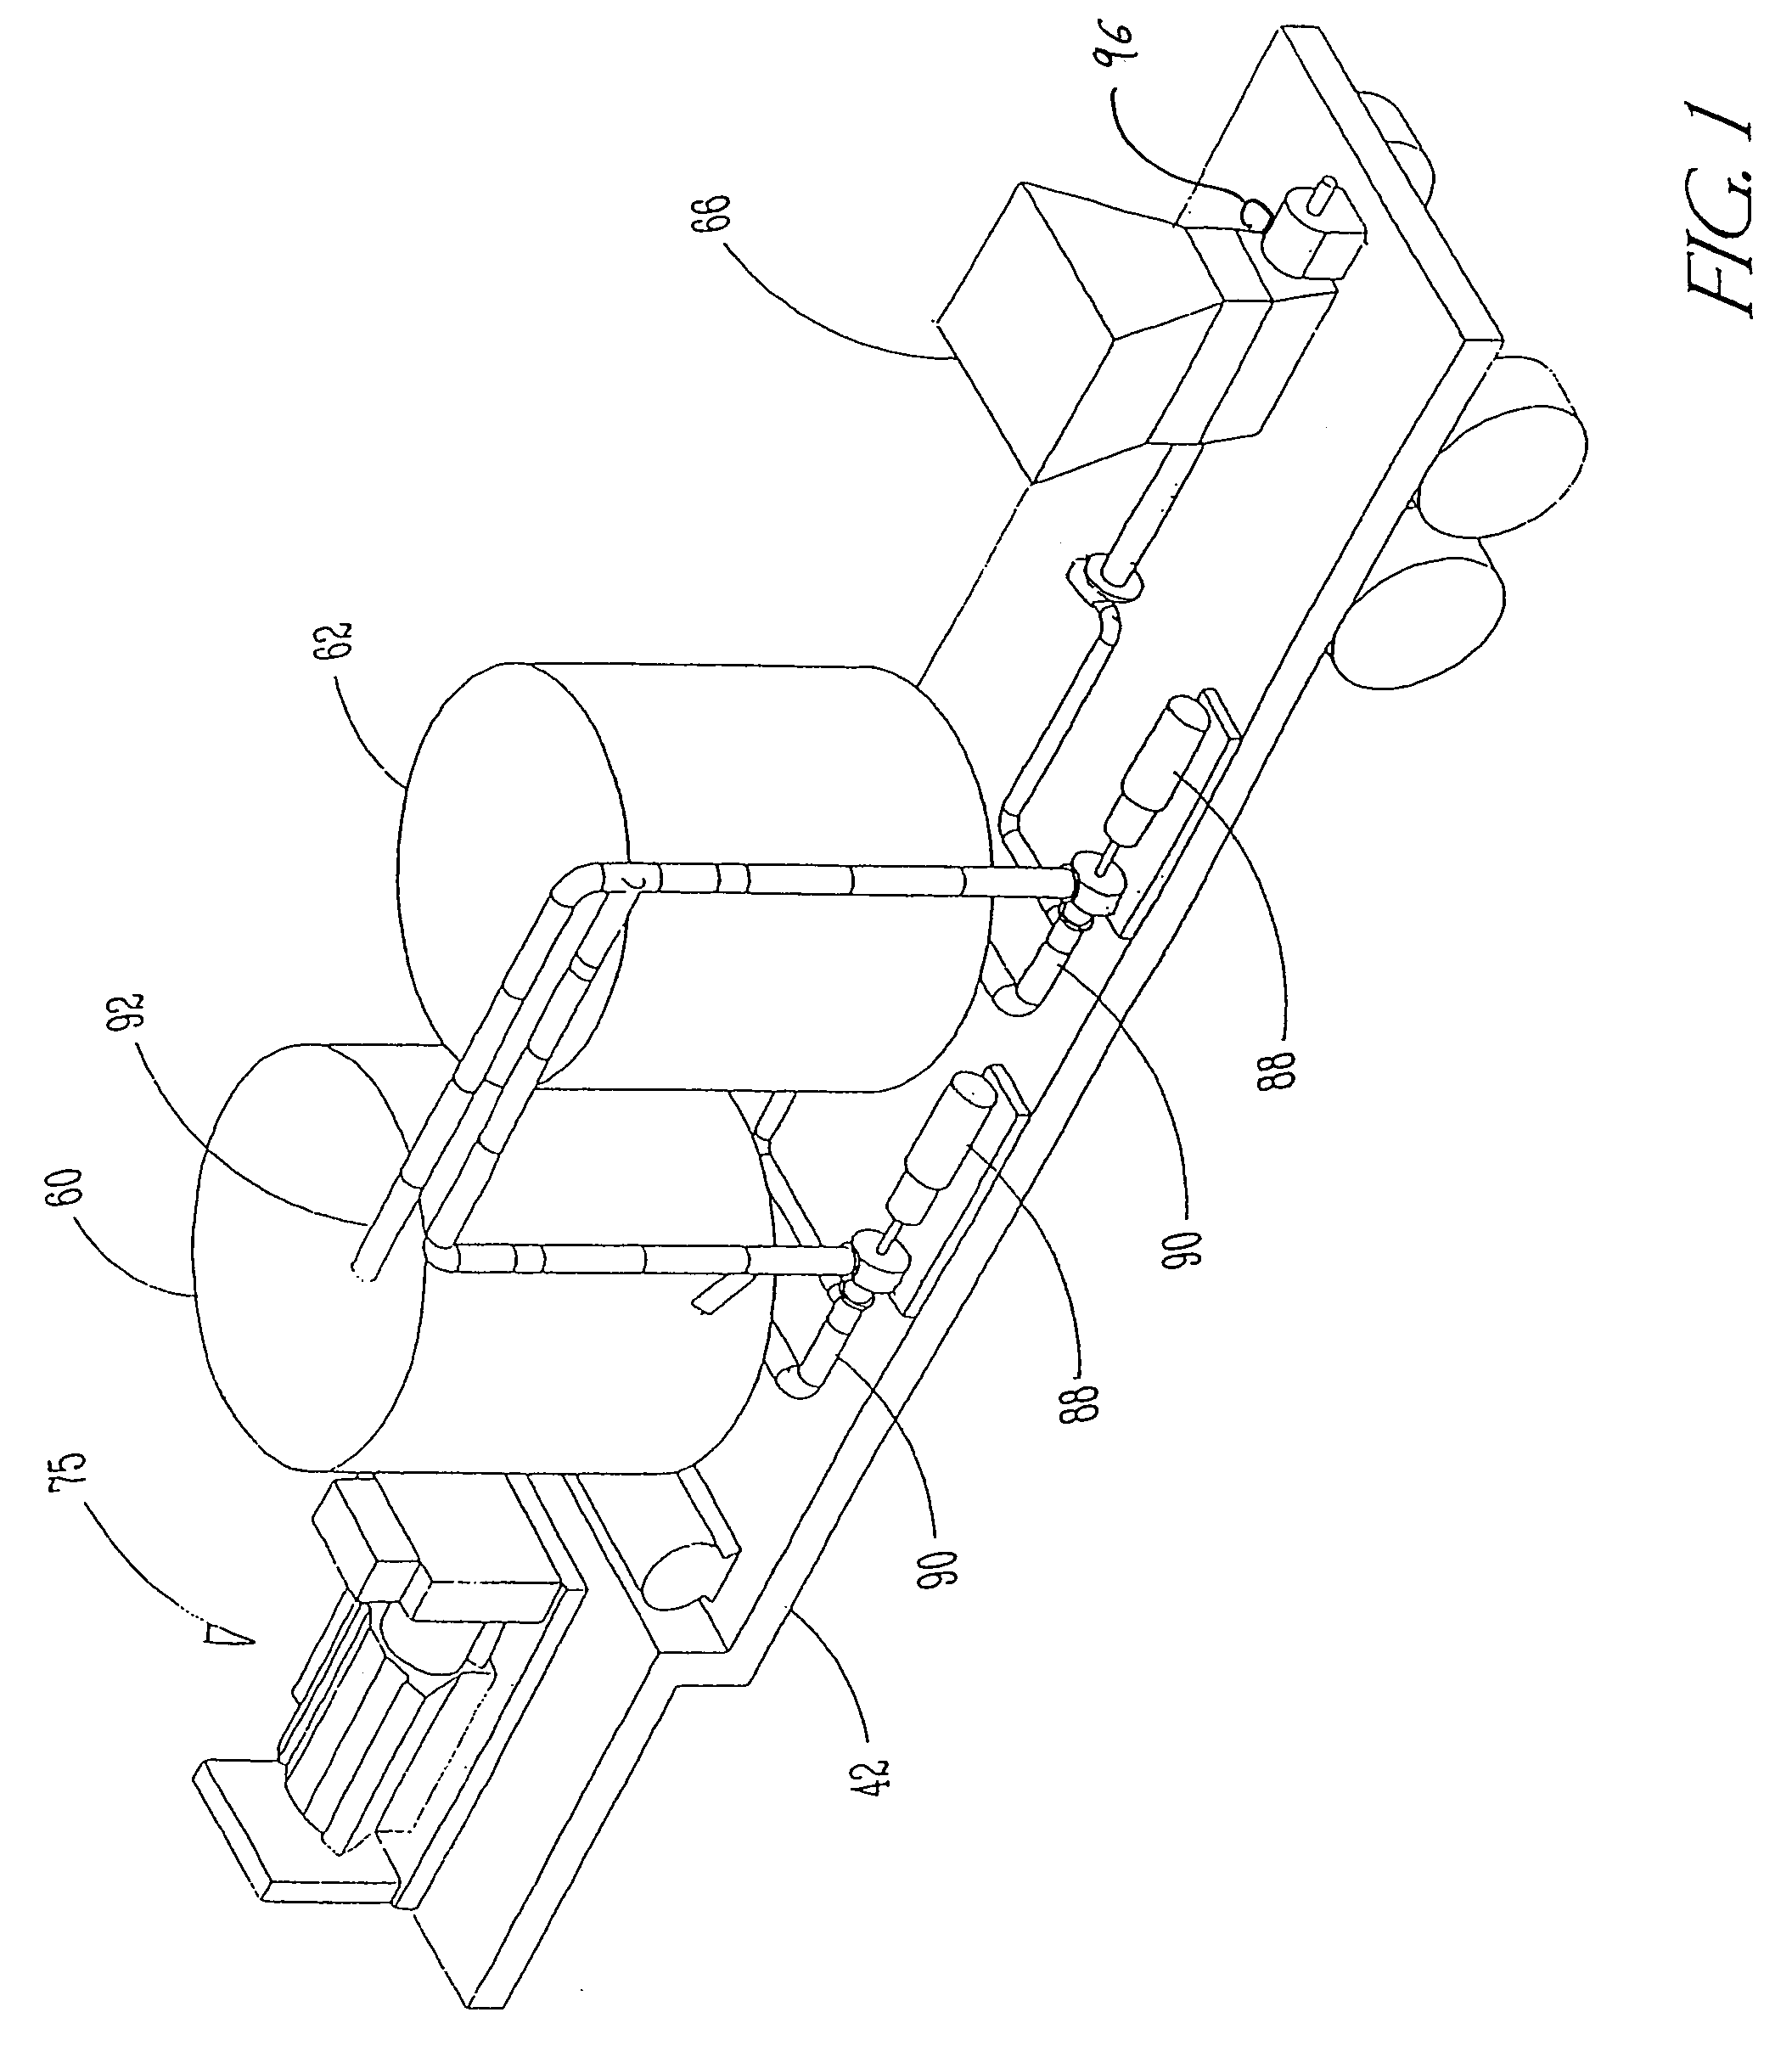 Apparatus for recycling of protein waste and fuel production